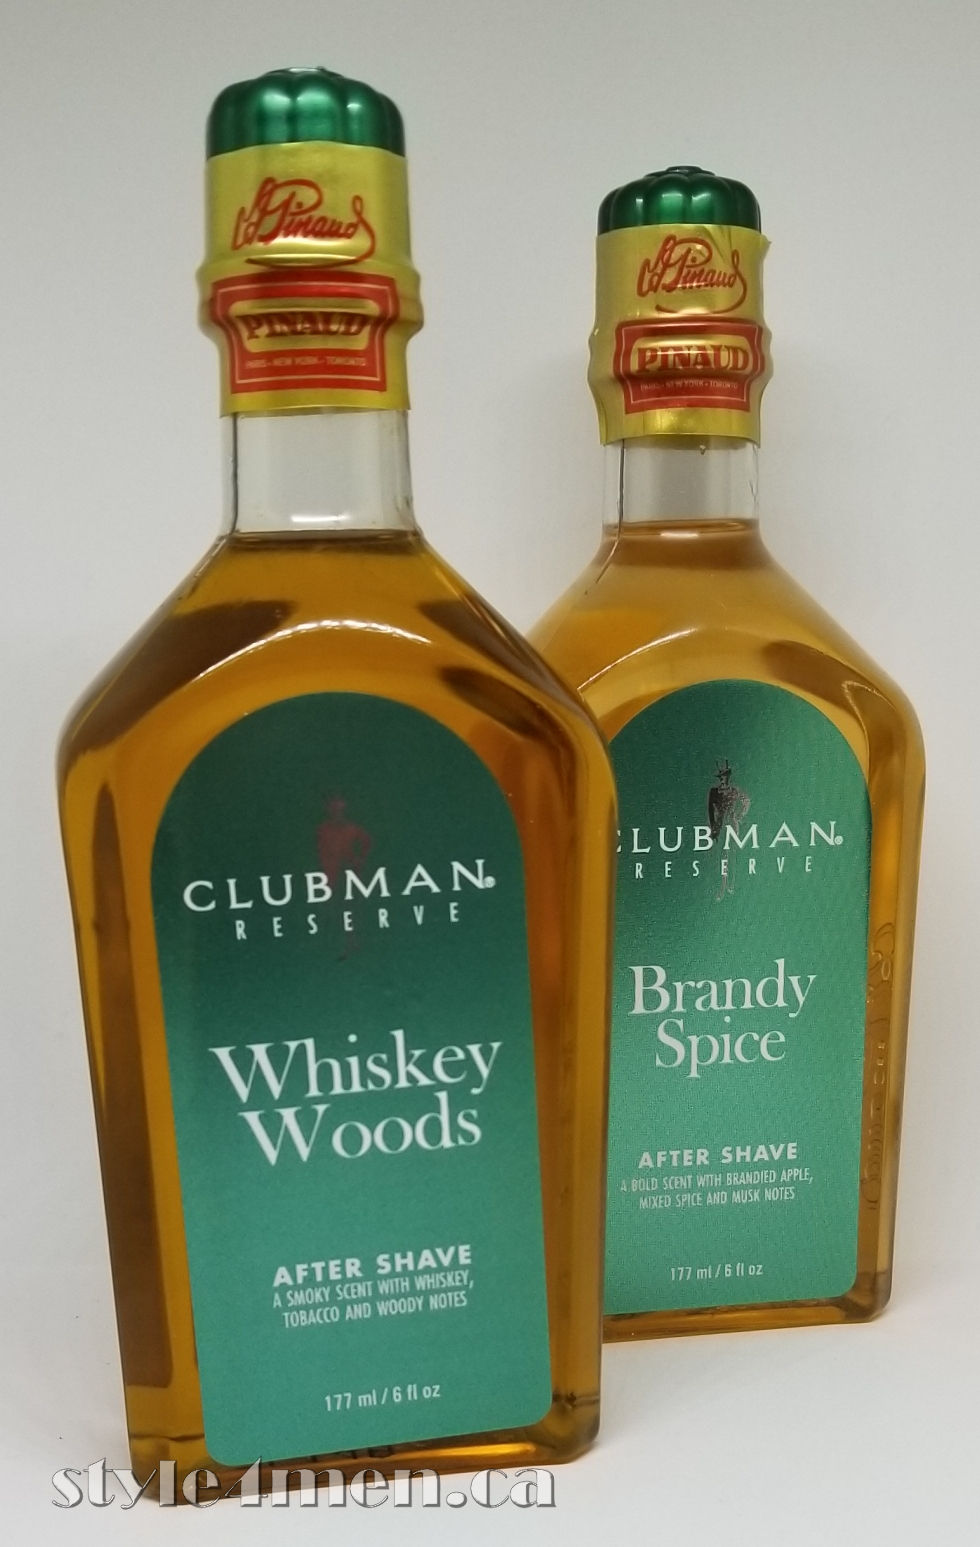 New spirit inspired aftershaves from Clubman Reserve